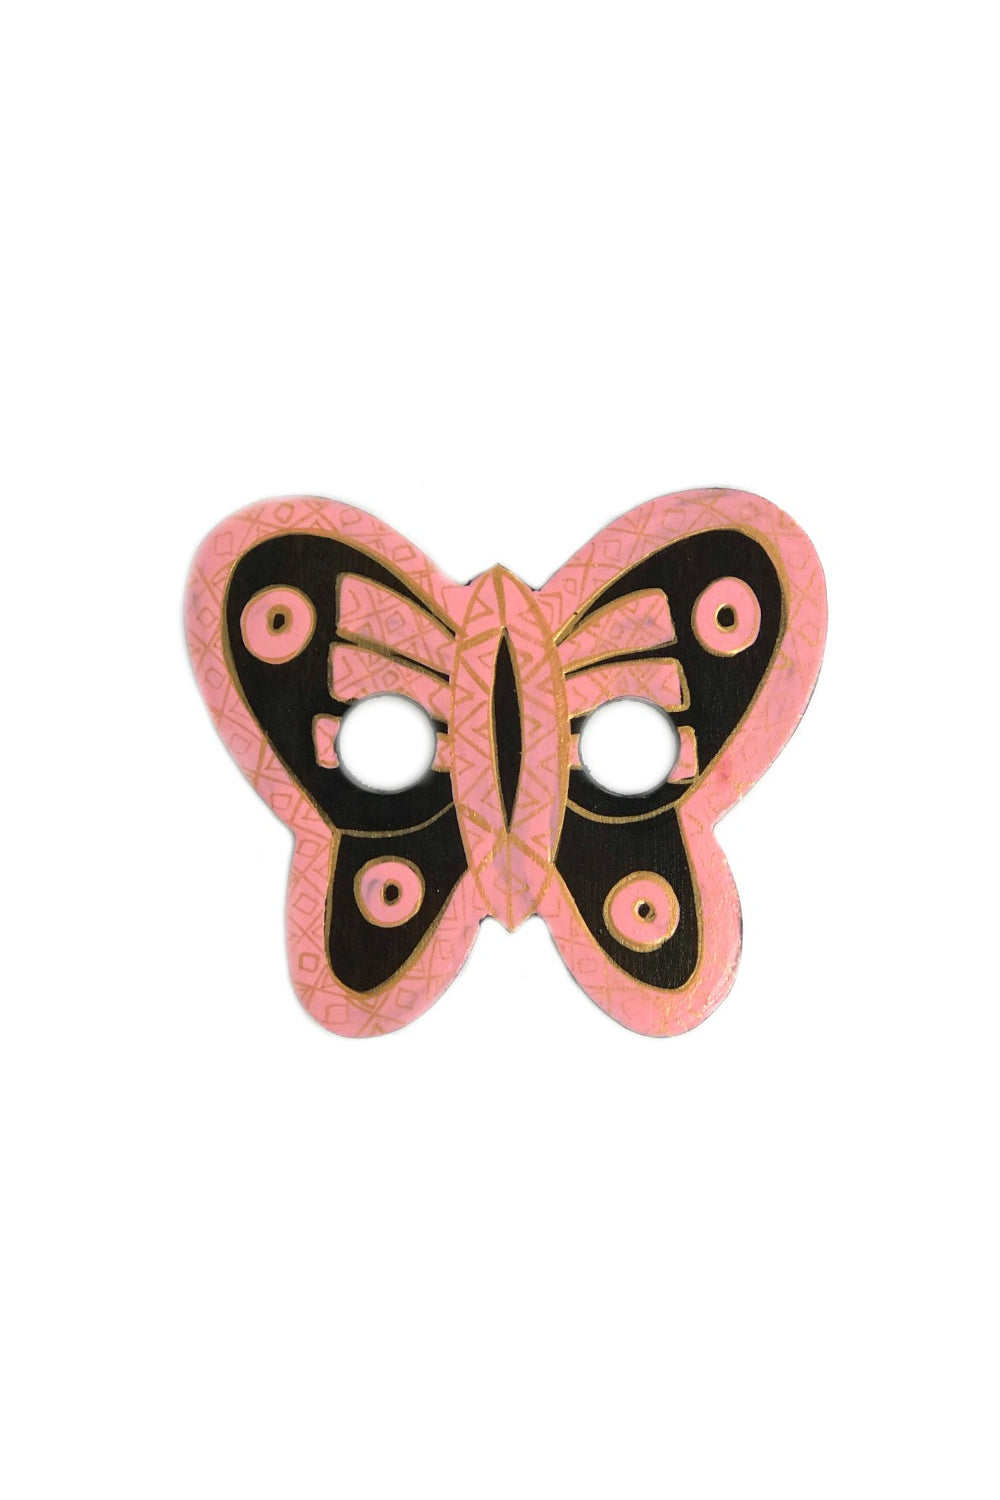 sarong-buckle-wood-hand-painted-butterfly-pink-gold